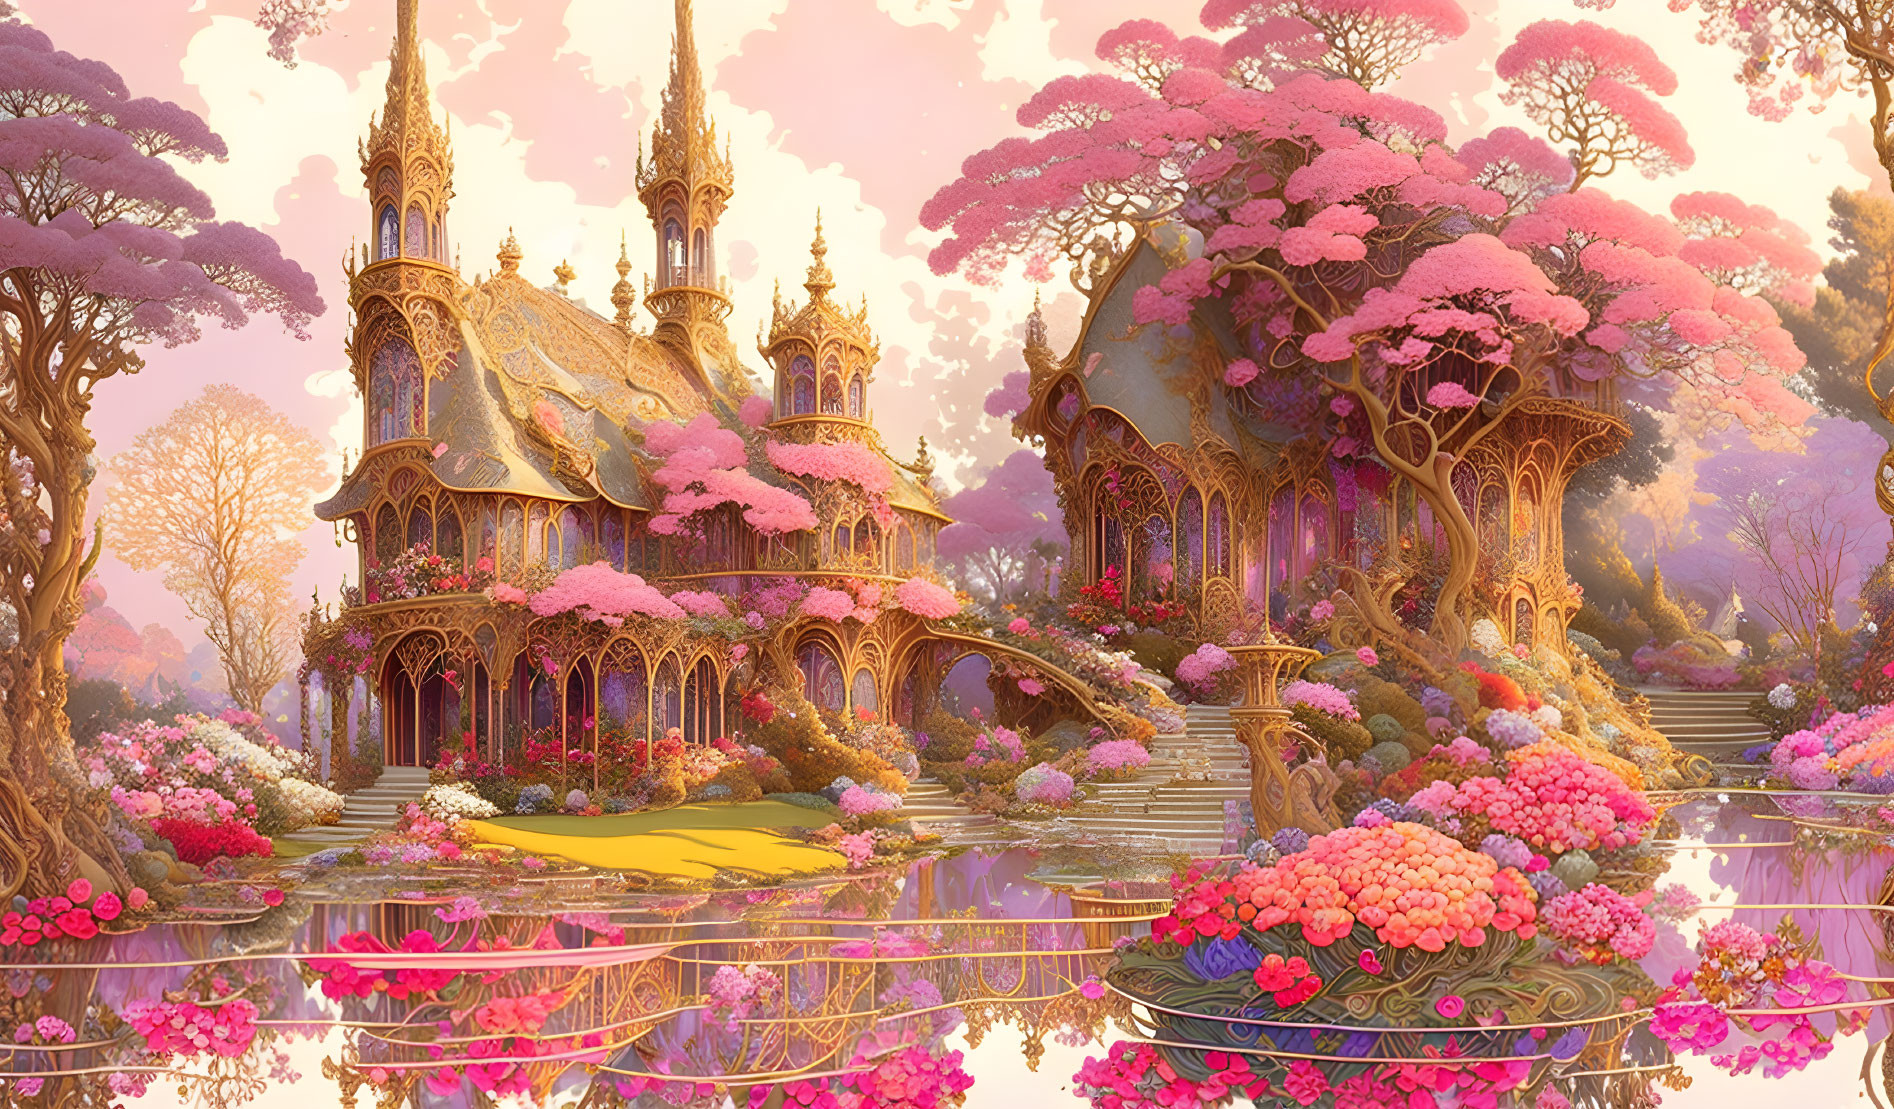 Golden mansion surrounded by pink trees near reflective water under enchanting sunset.